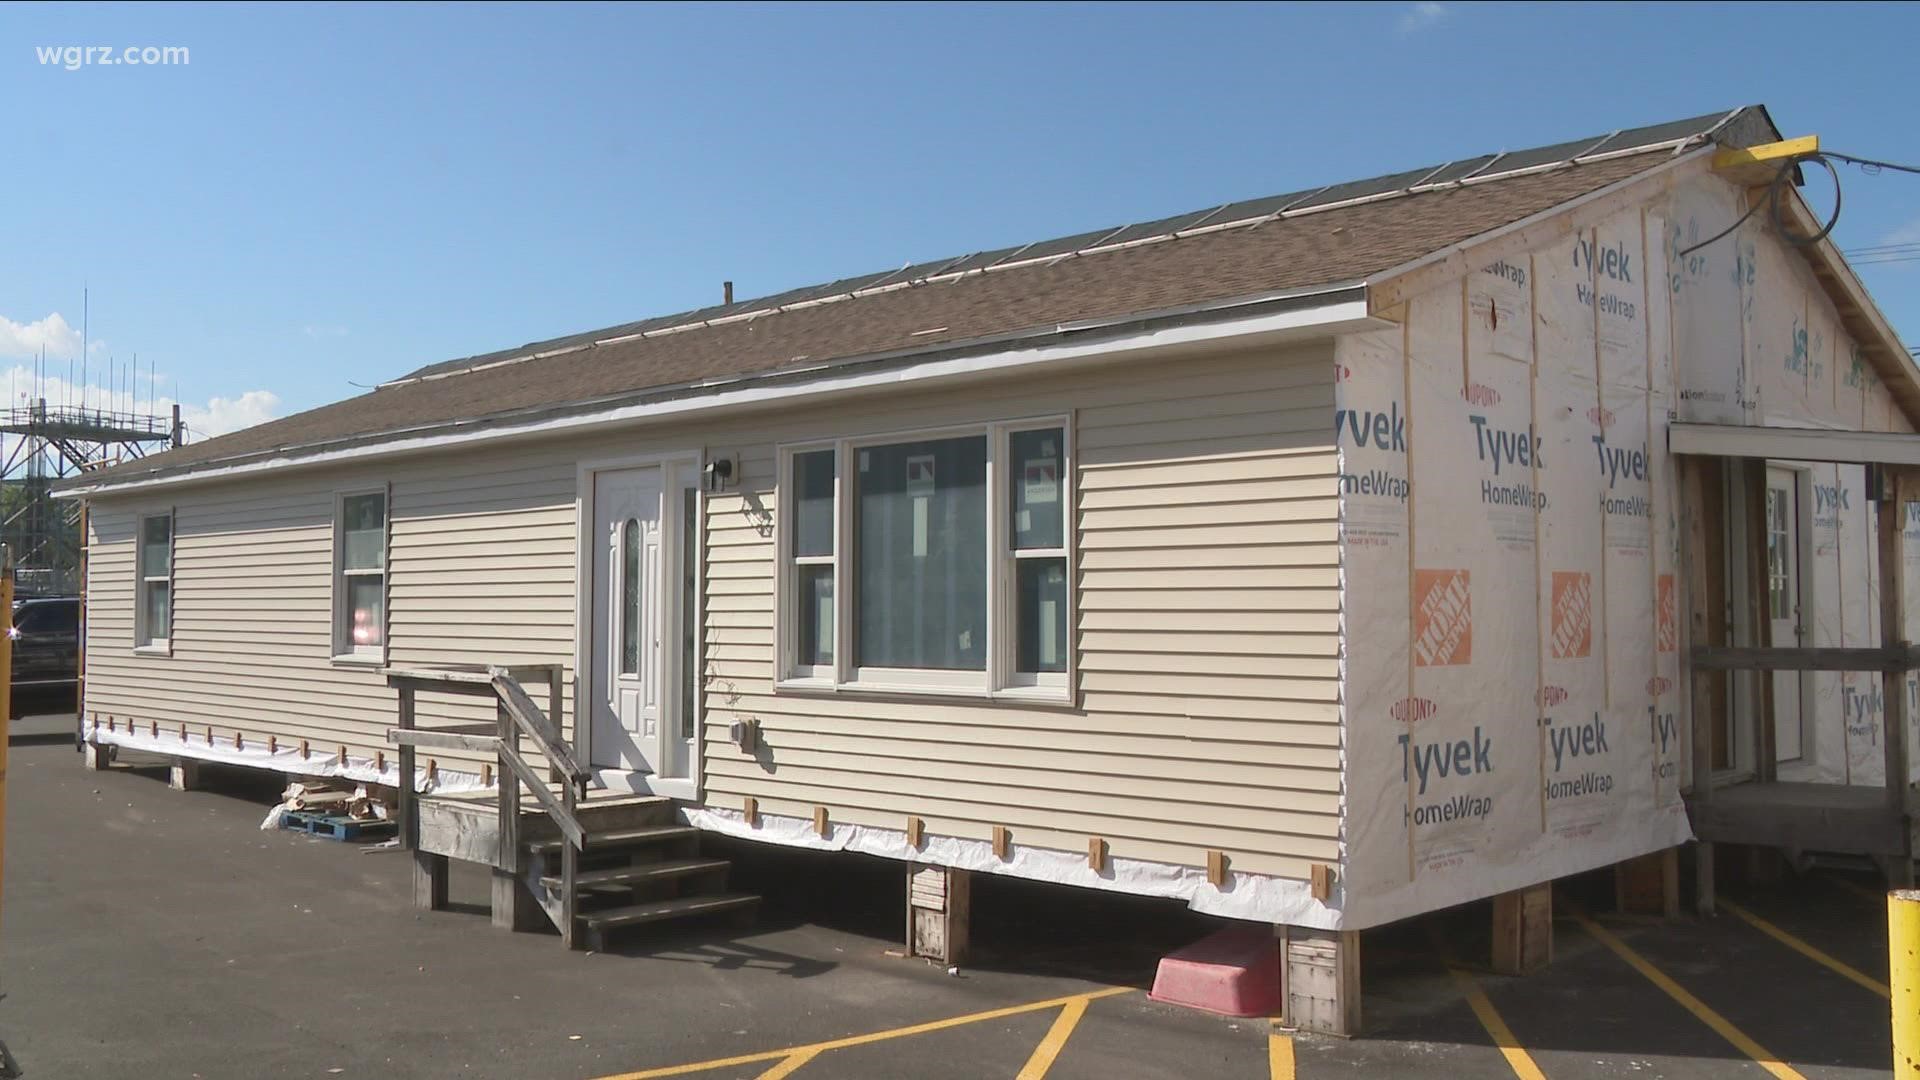 Students at the Harkness Career Center in Cheektowaga are ready to show off all the hard work they did this year, building a house in the parking lot their school.